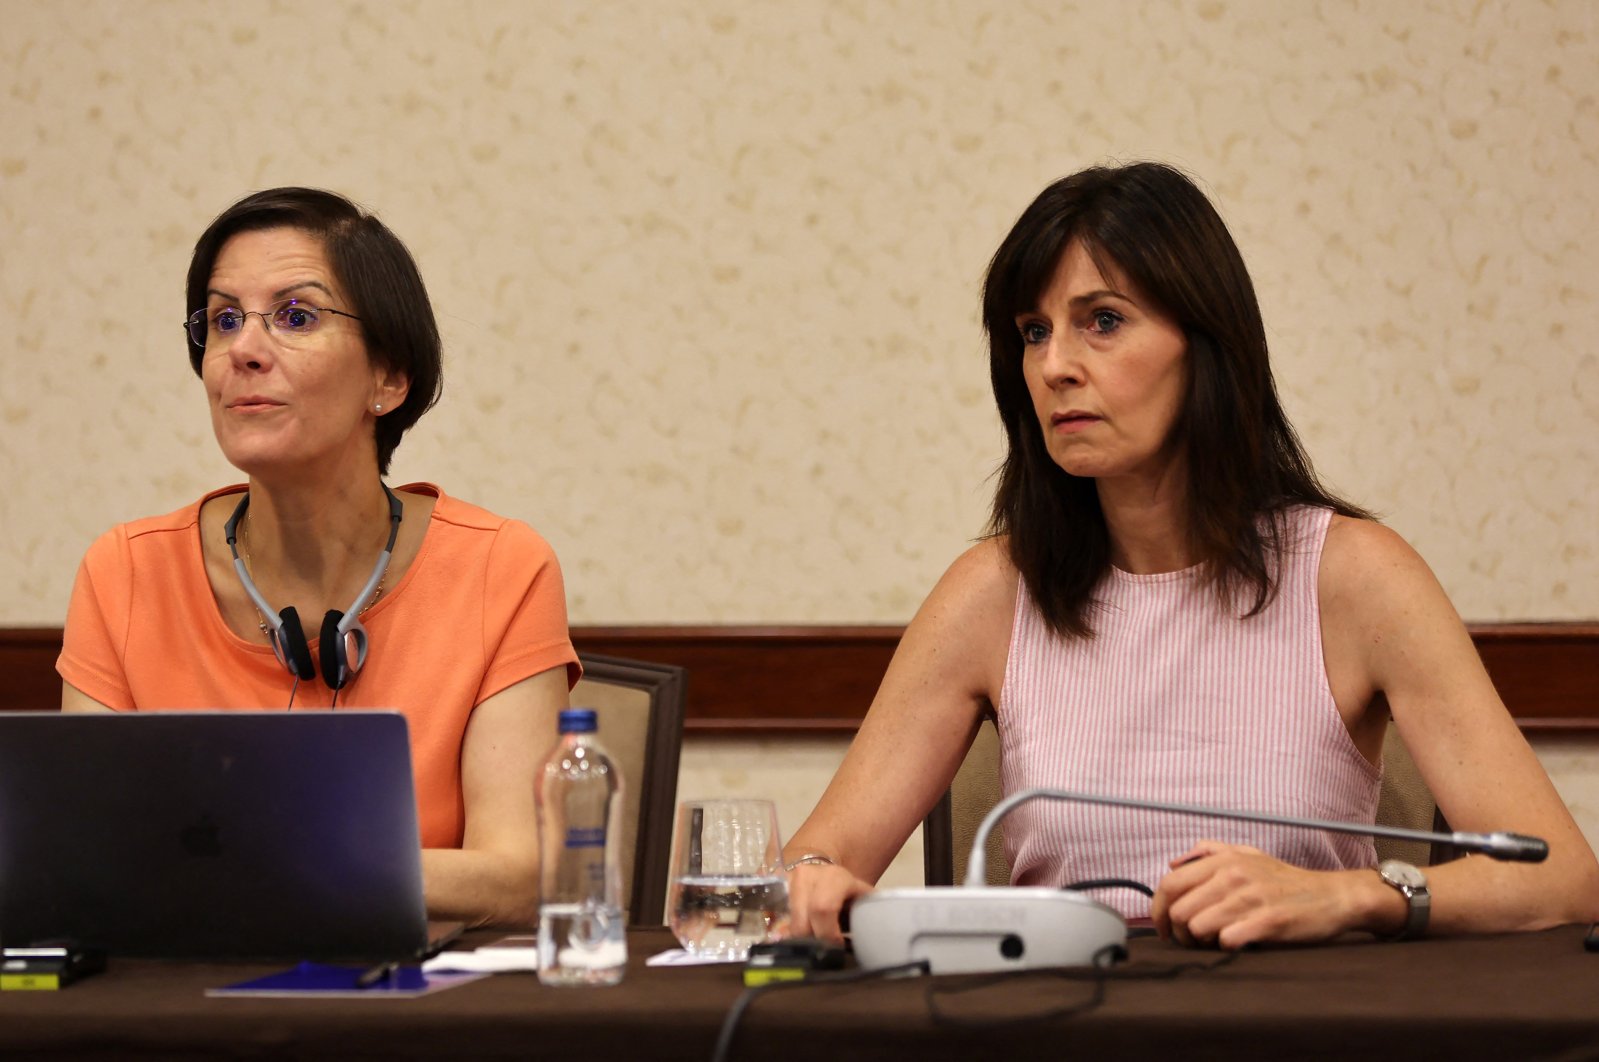 United Nations Special Rapporteur on violence against women, Reem Alsalem (L) and U.N. Human Rights Officer Orlagh McCann (R) at a press conference in Ankara, Turkey, July 27, 2022 (AFP Photo)